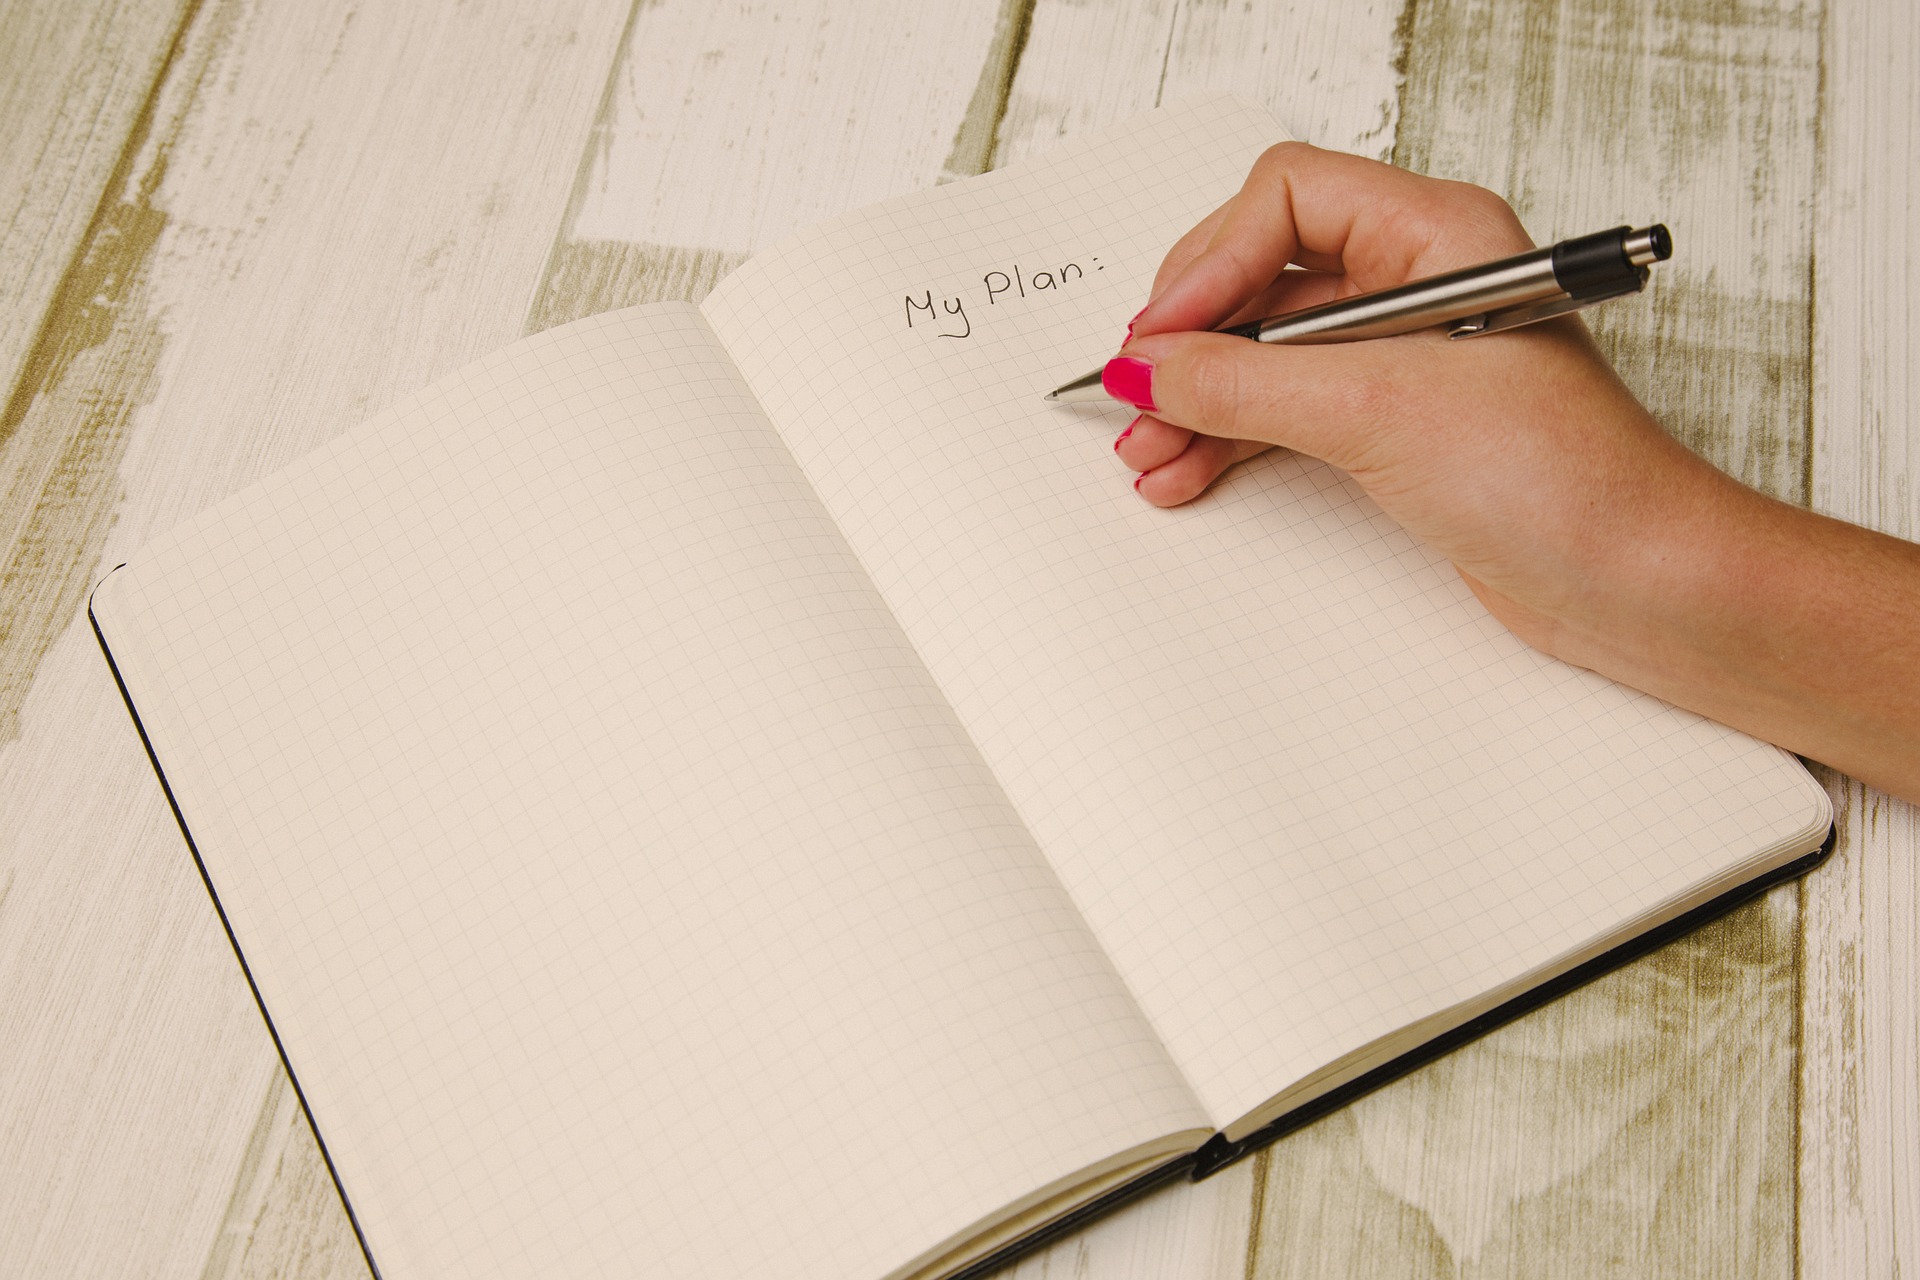 Woman writing the words "my plan" in a journal.